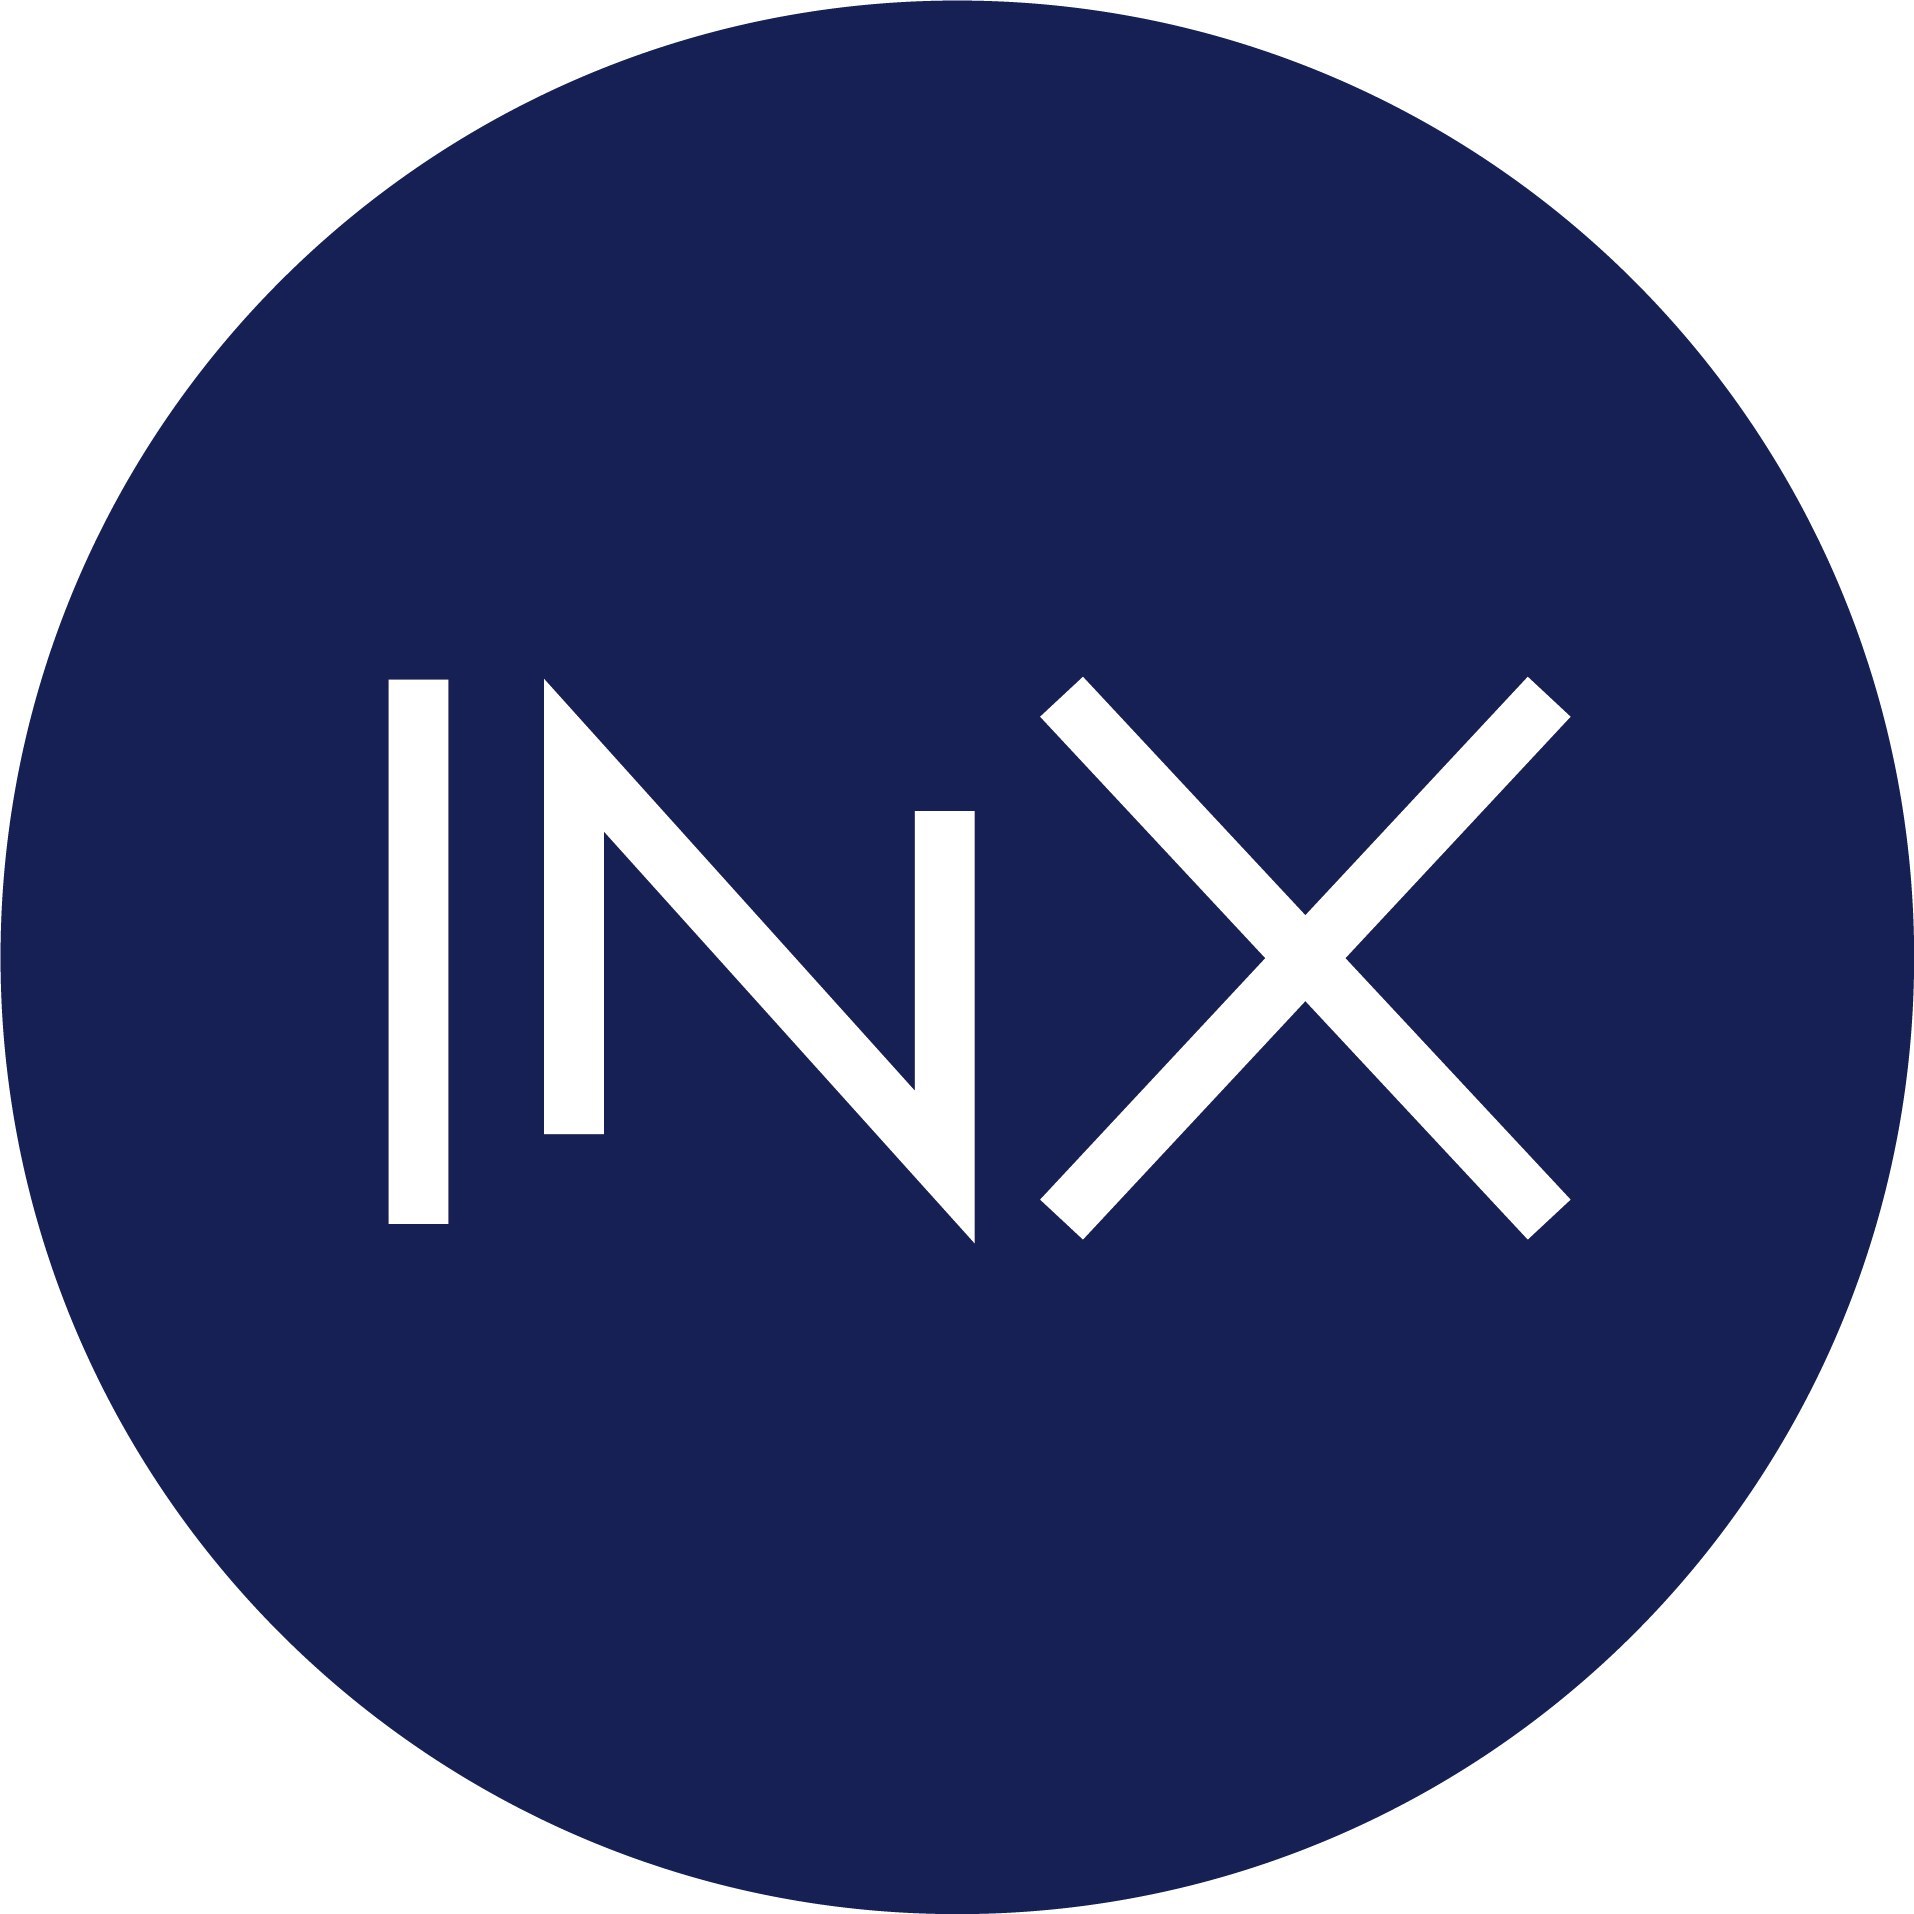 INX SUBMITS A BID TO PURCHASE VOYAGER'S ASSETS